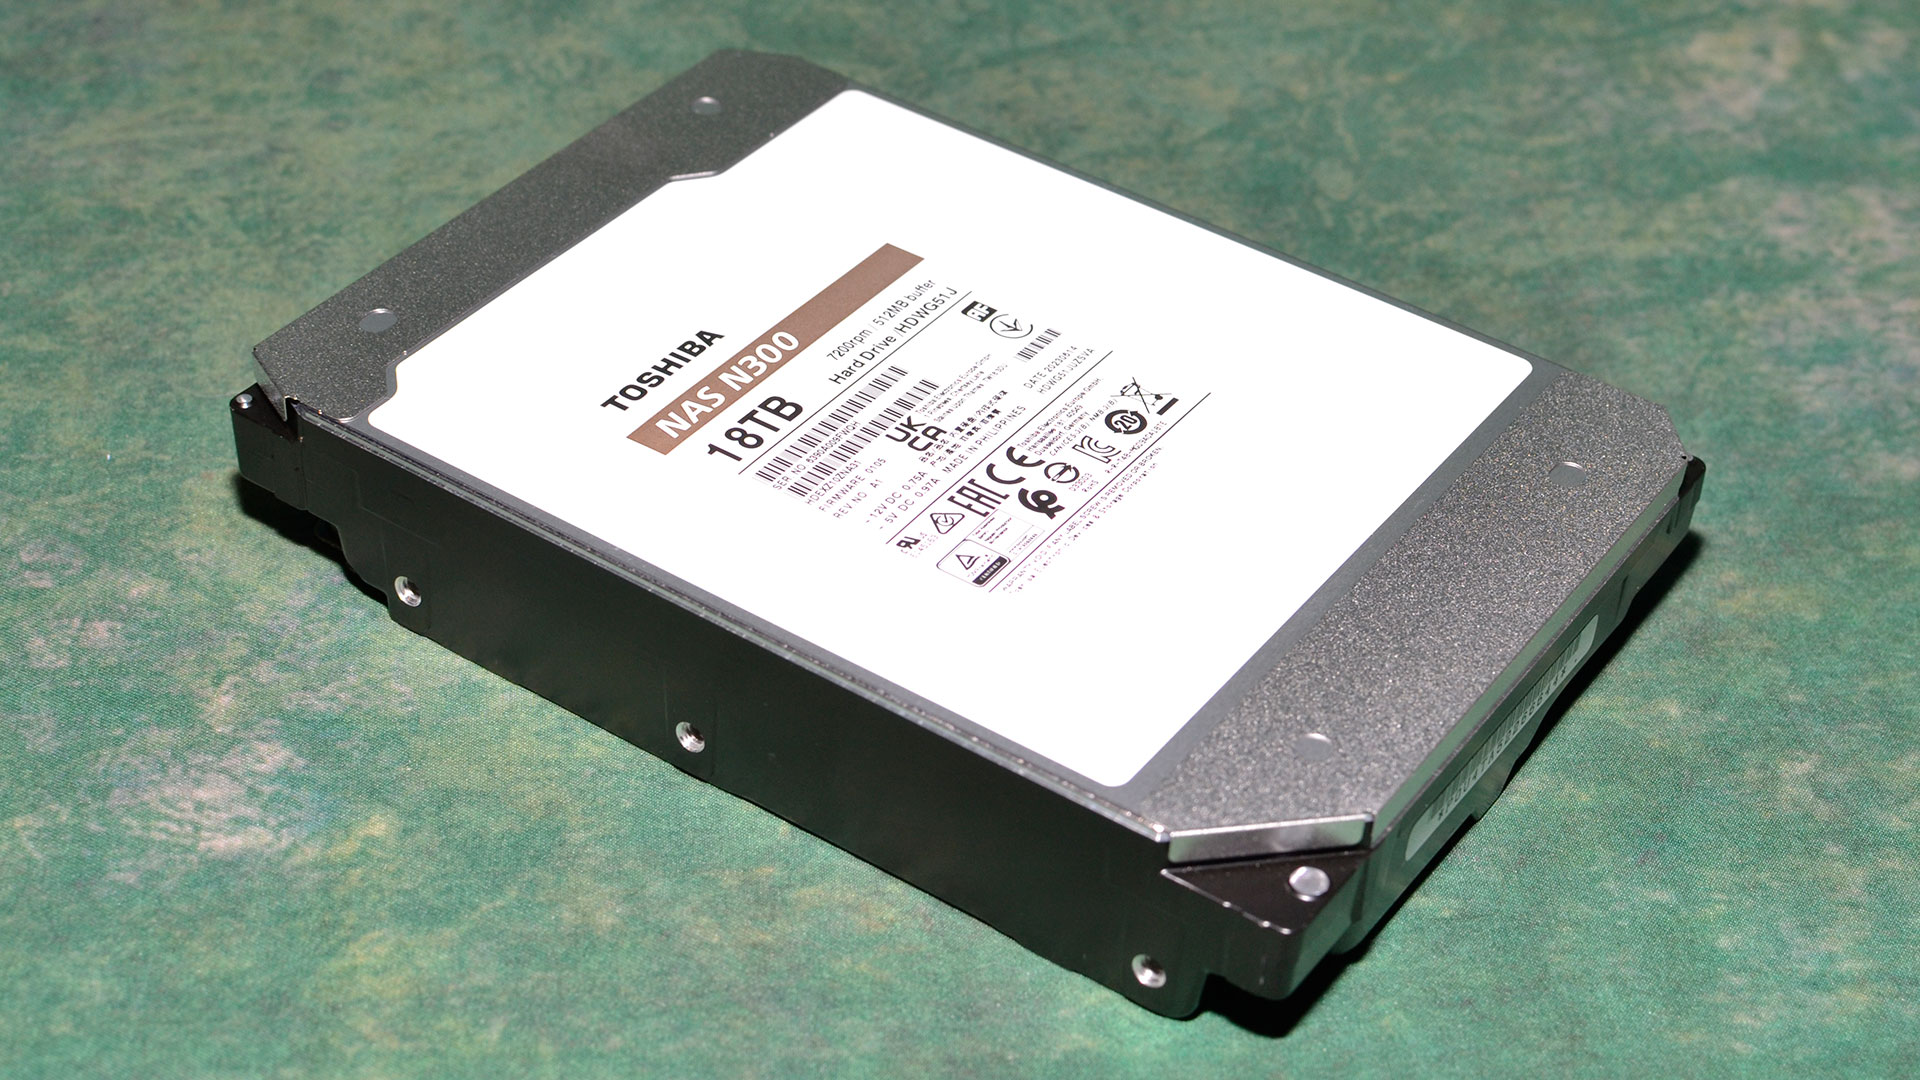 Toshiba N300 18TB HDD review: This 'budget' NAS drive gets the job done